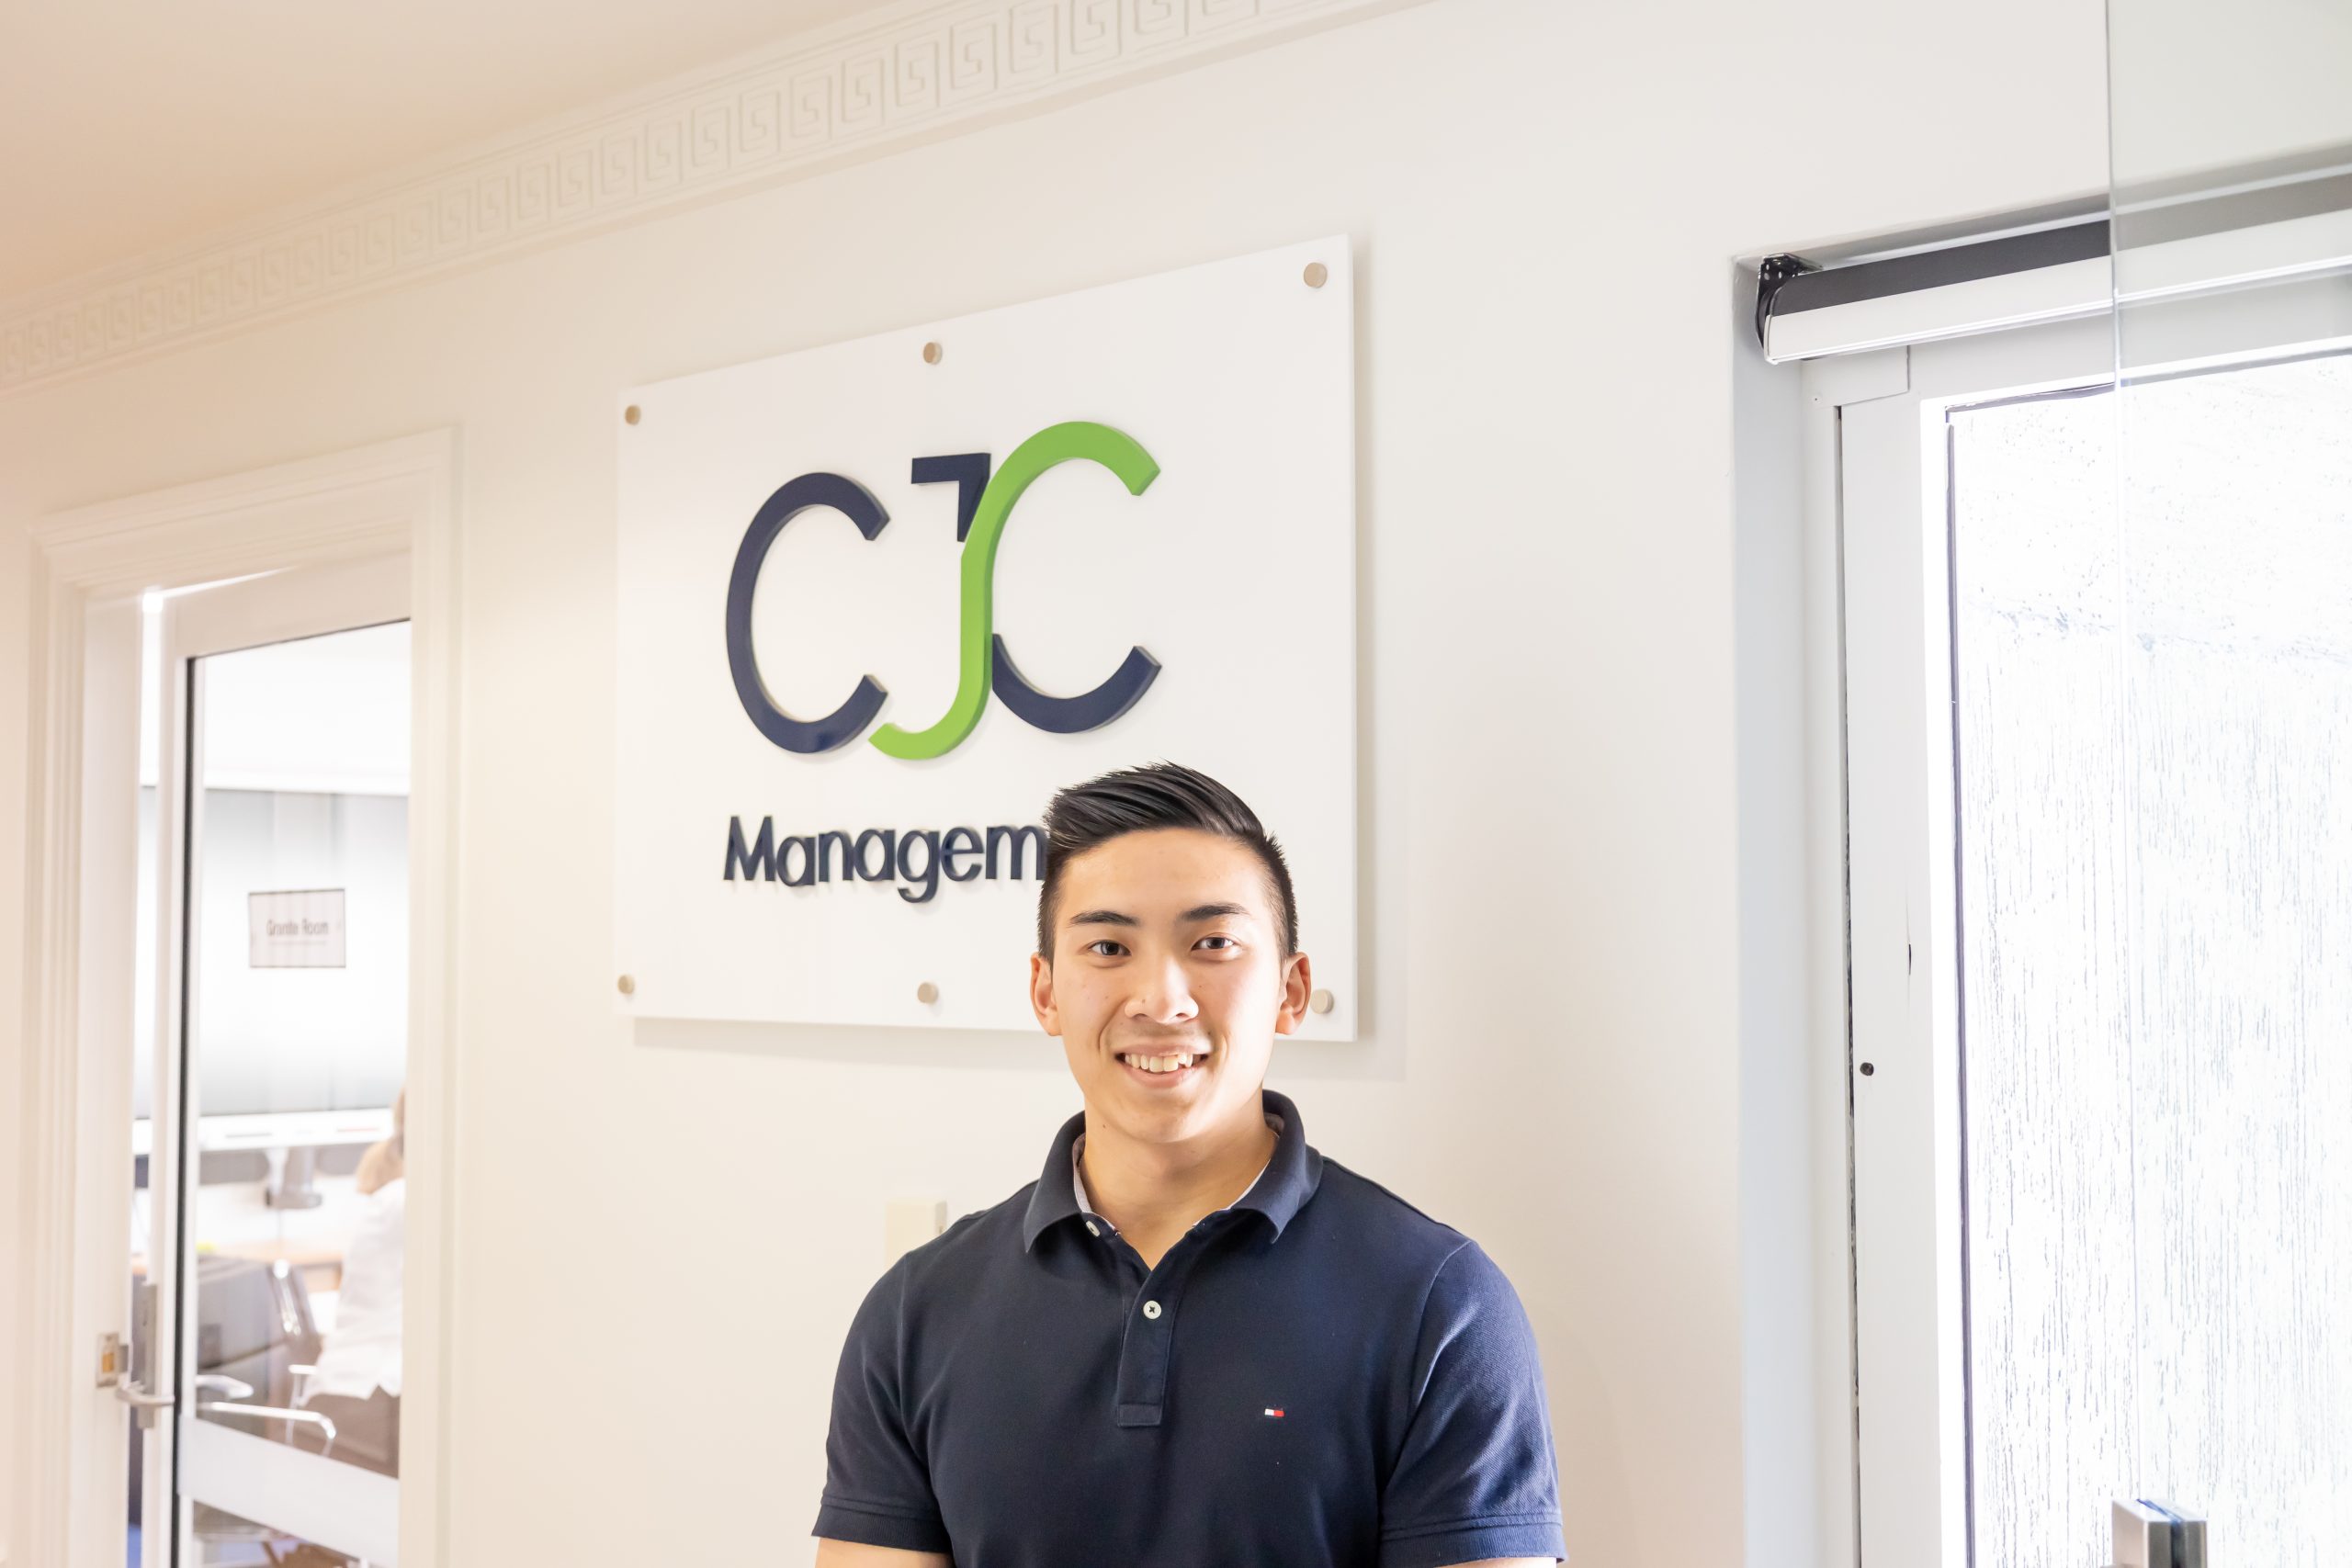 Career progress: From undergraduate to Project Engineer 

The successful journey of John Le at CJC Management 